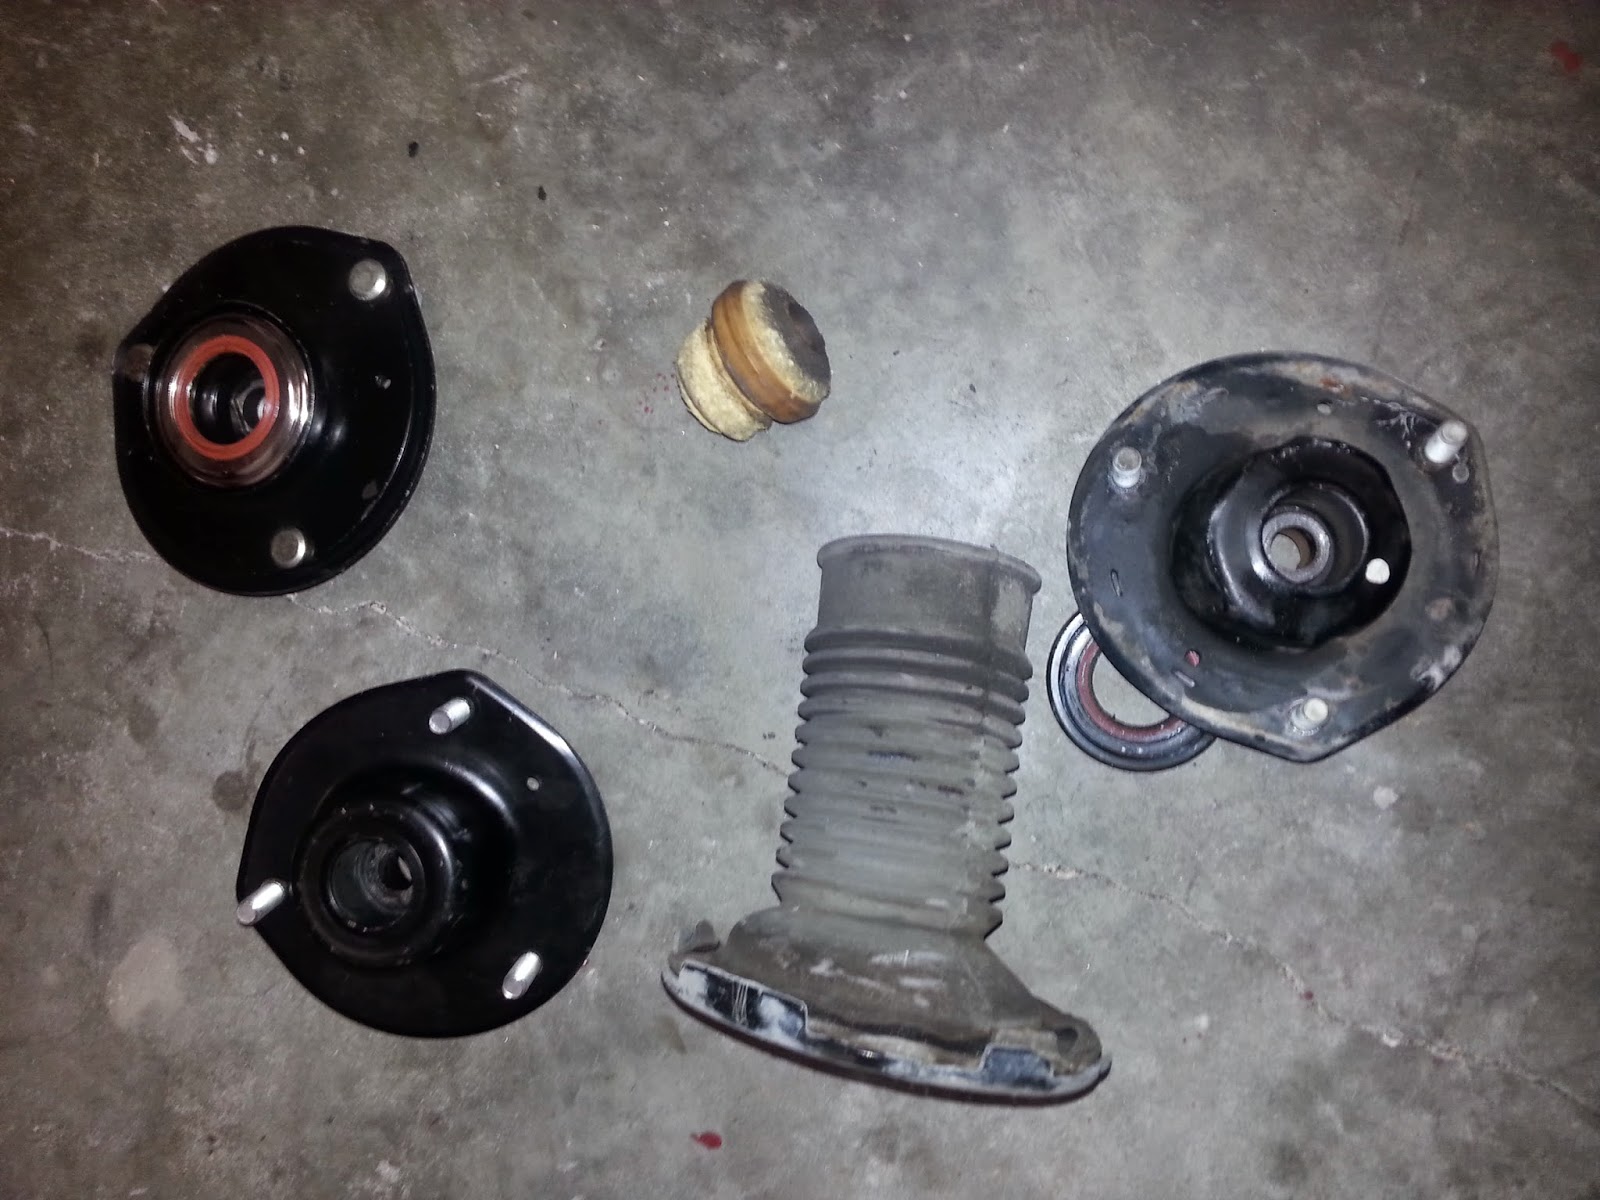 Corolla DIY: DIY - Toyota Camry Front Strut Replacement